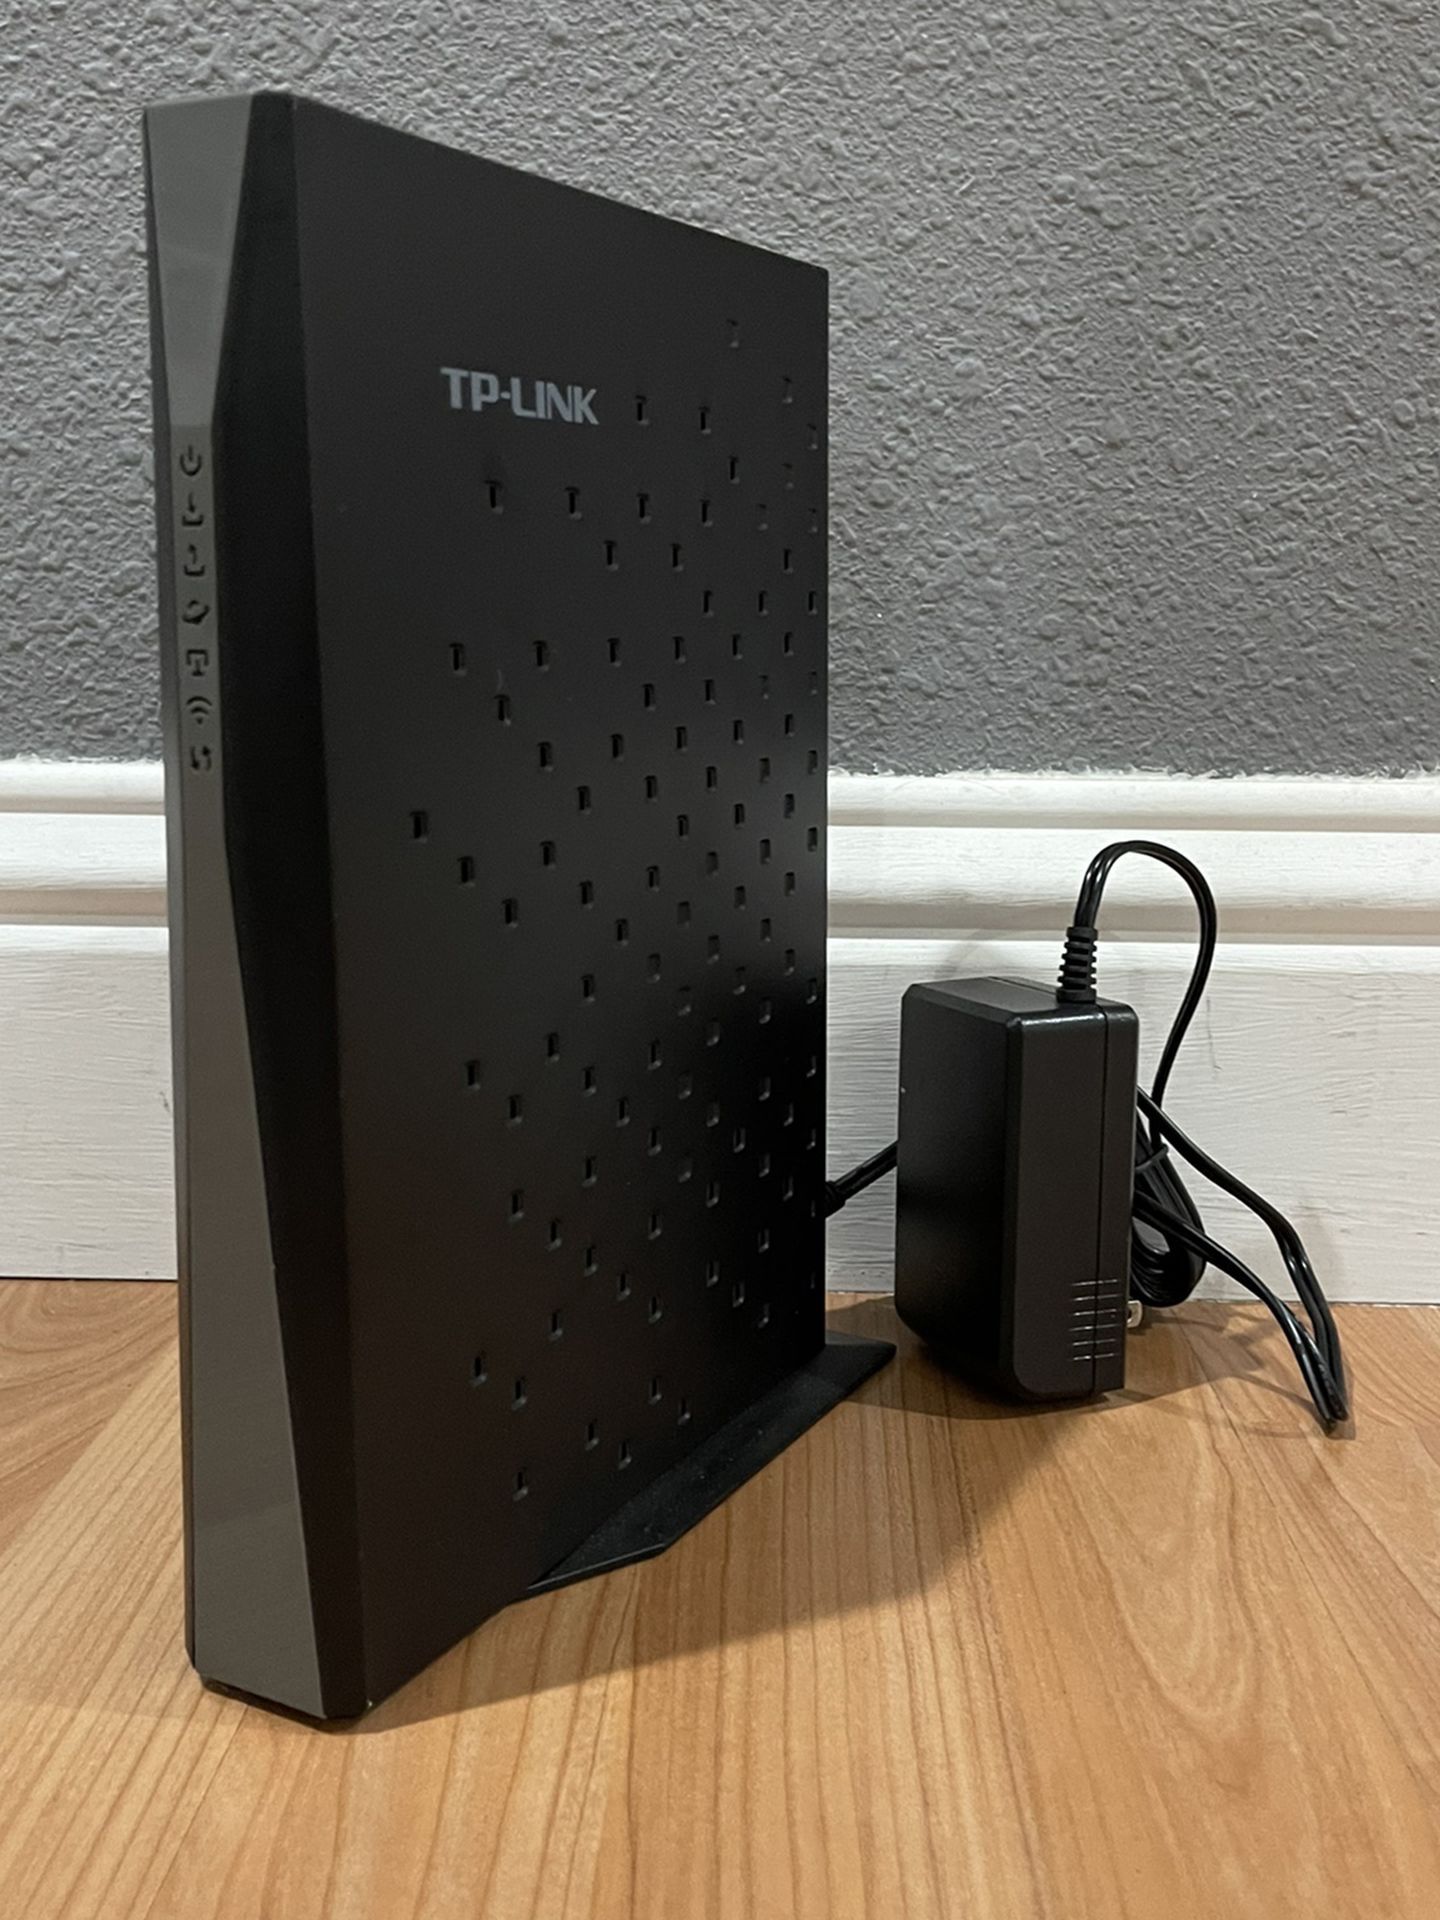 TP-LINK Archer CR700 2-in-one cable modem/router